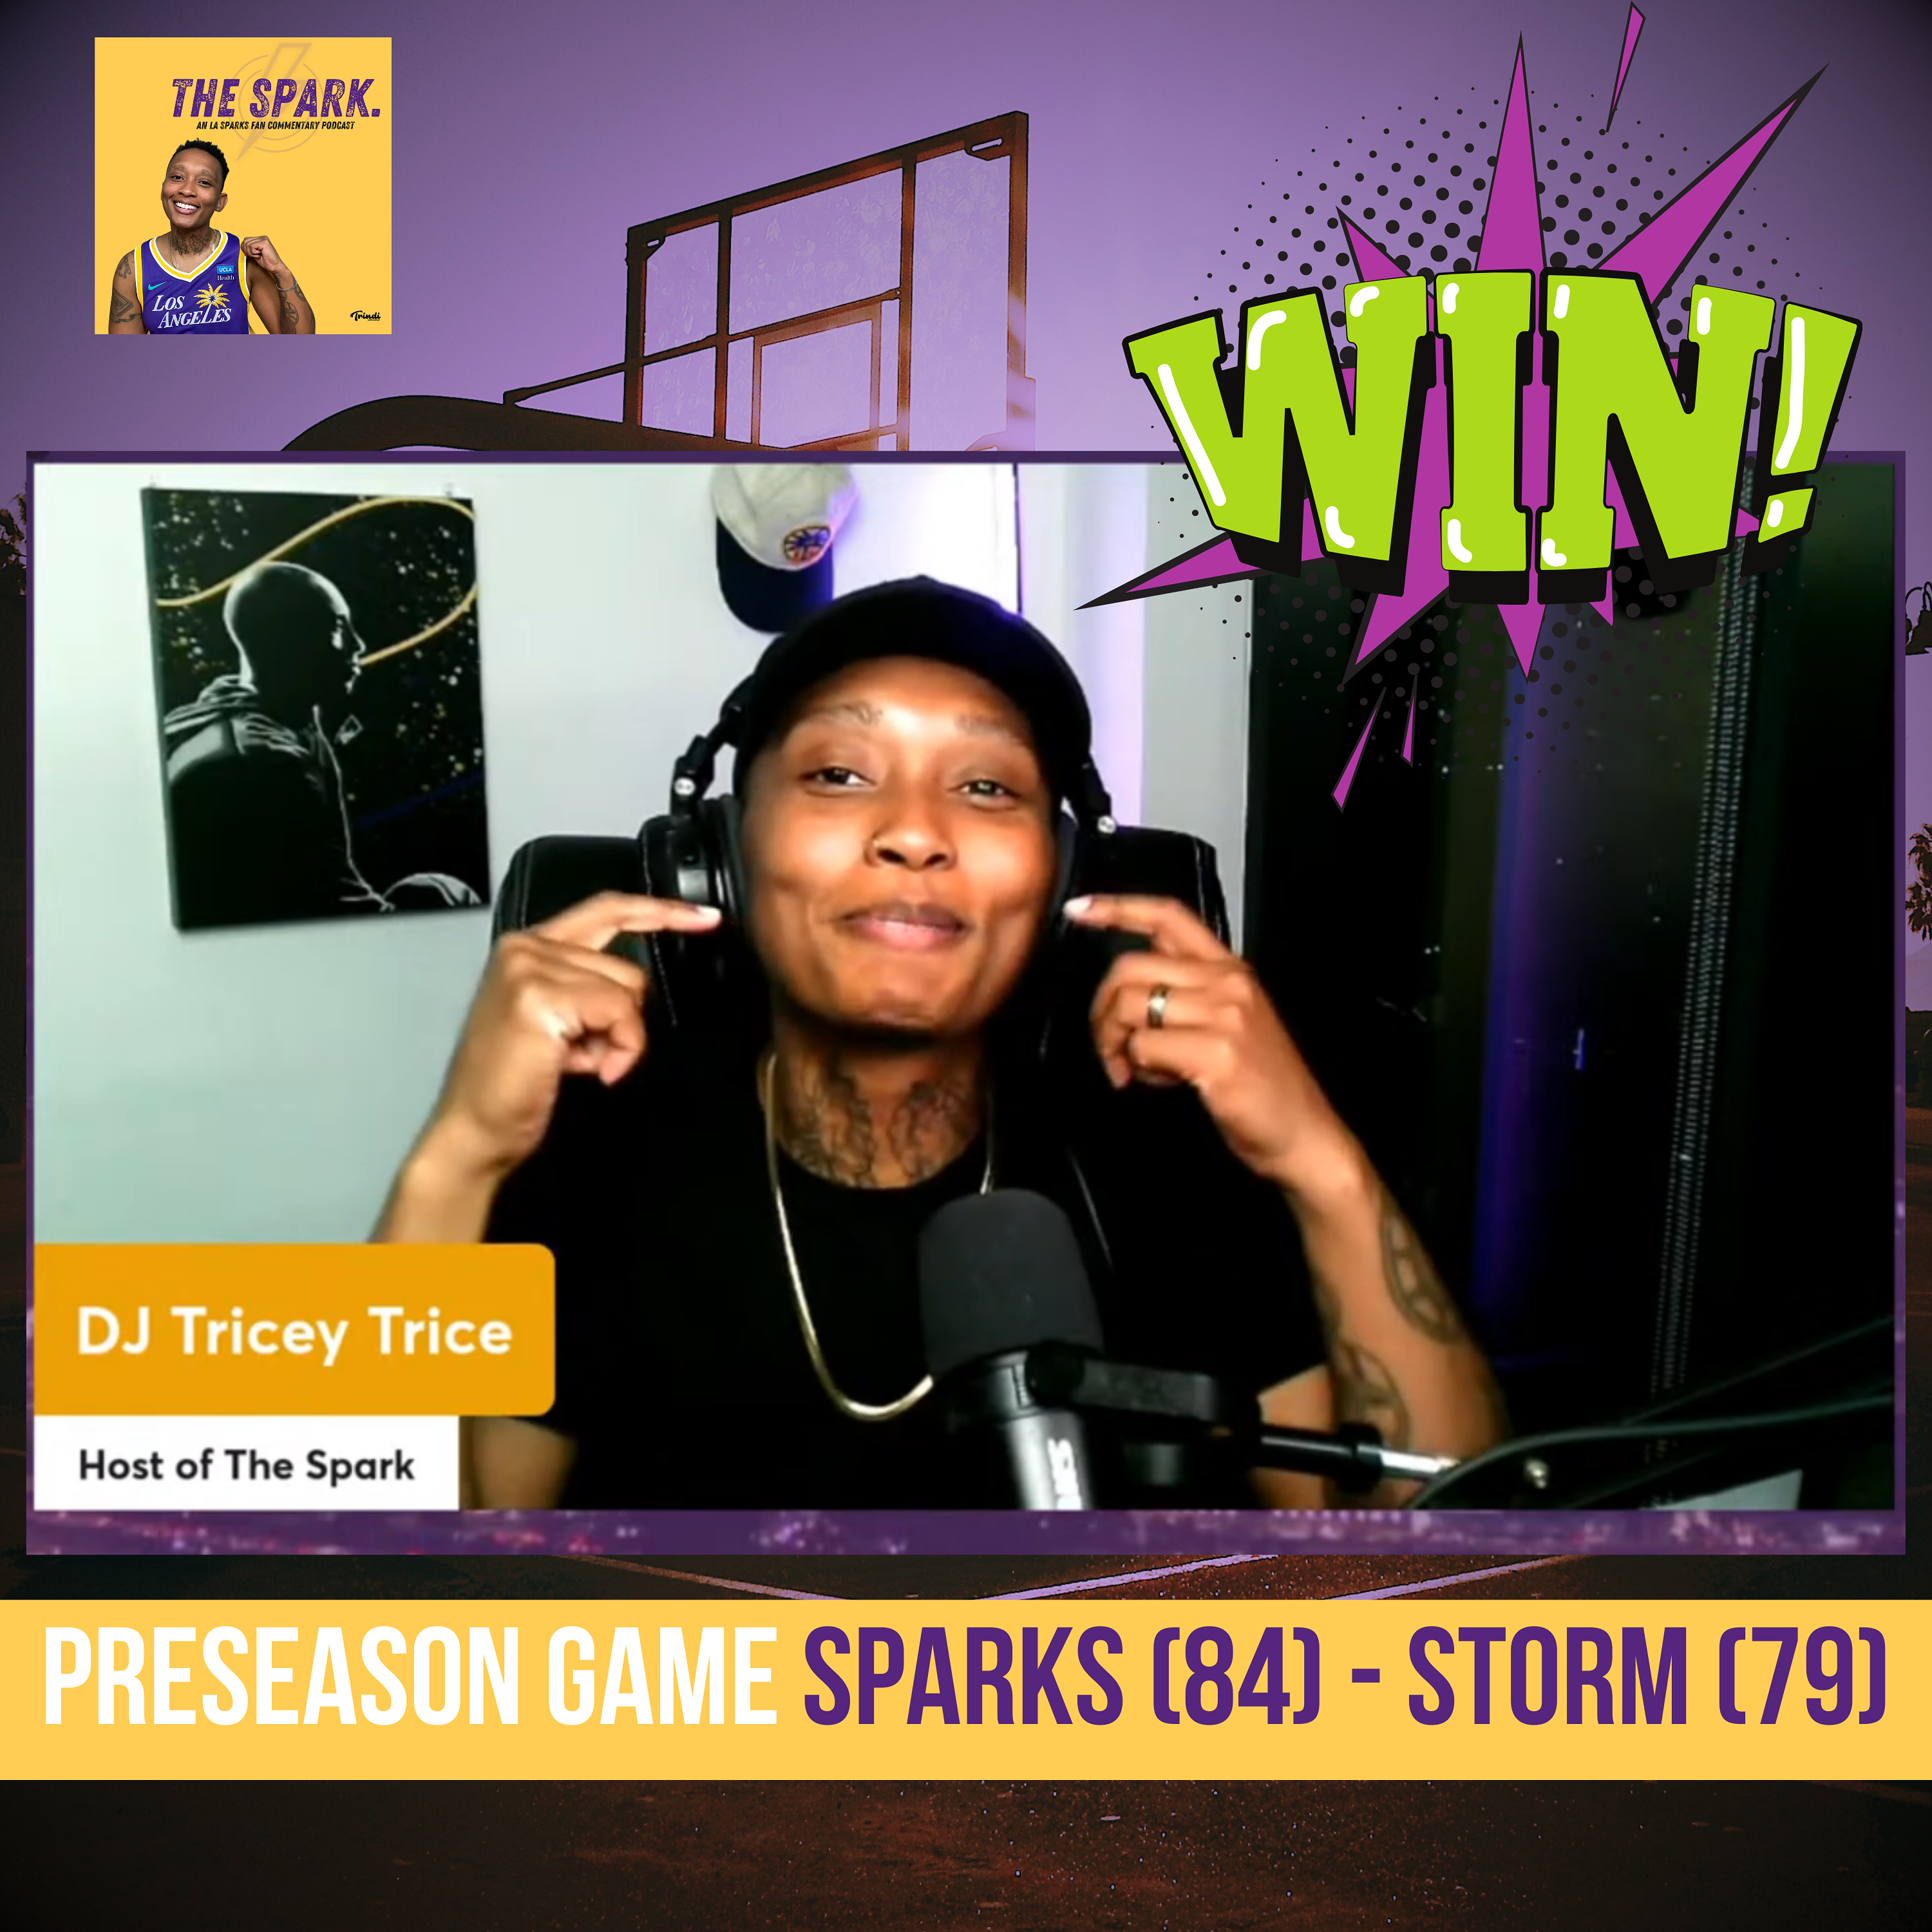 LA Sparks WIN first game of the Season 84-79 #WNBA